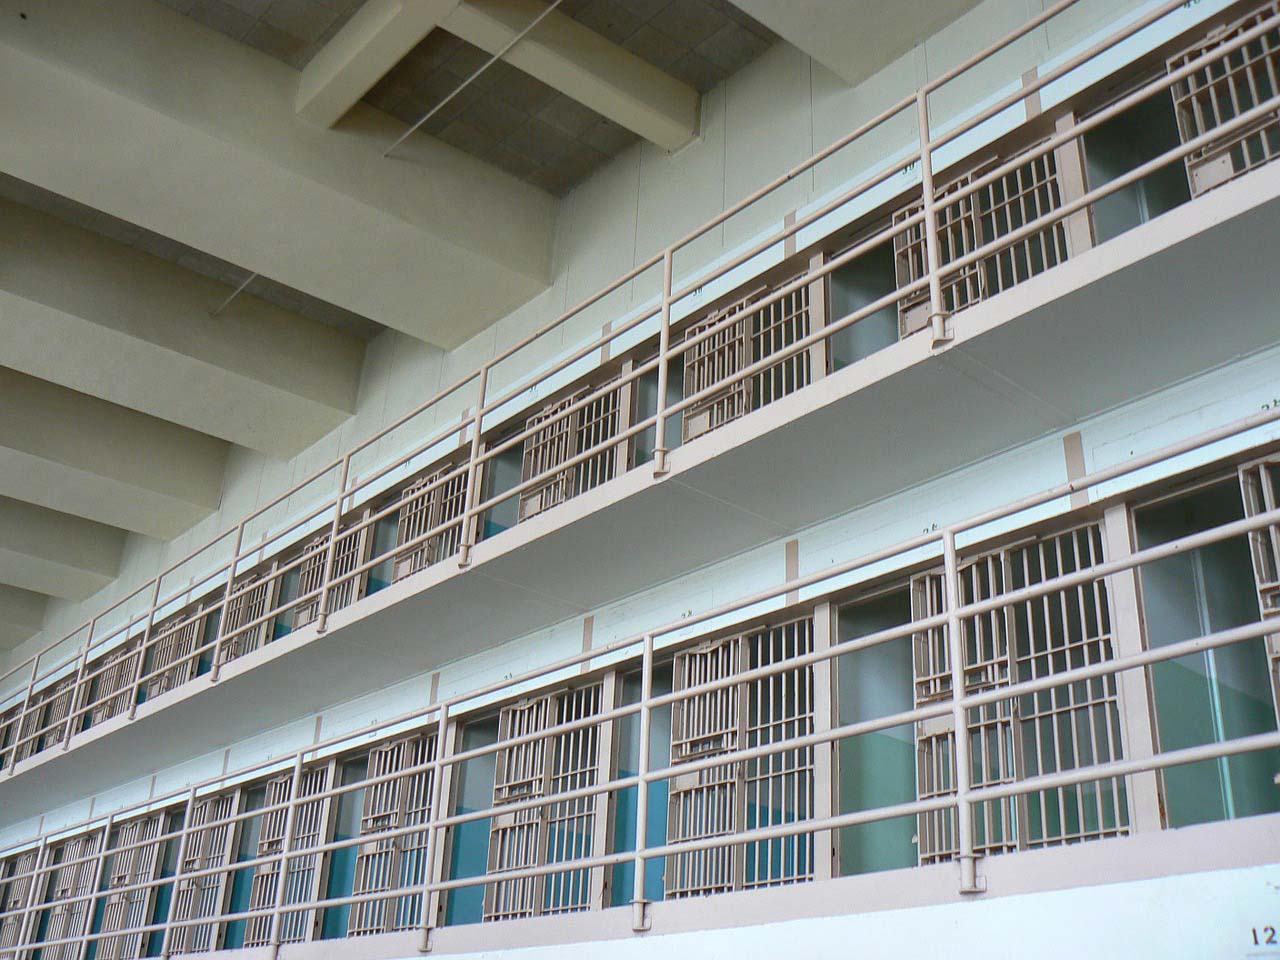 Prison for Not Maintaining Tax Records